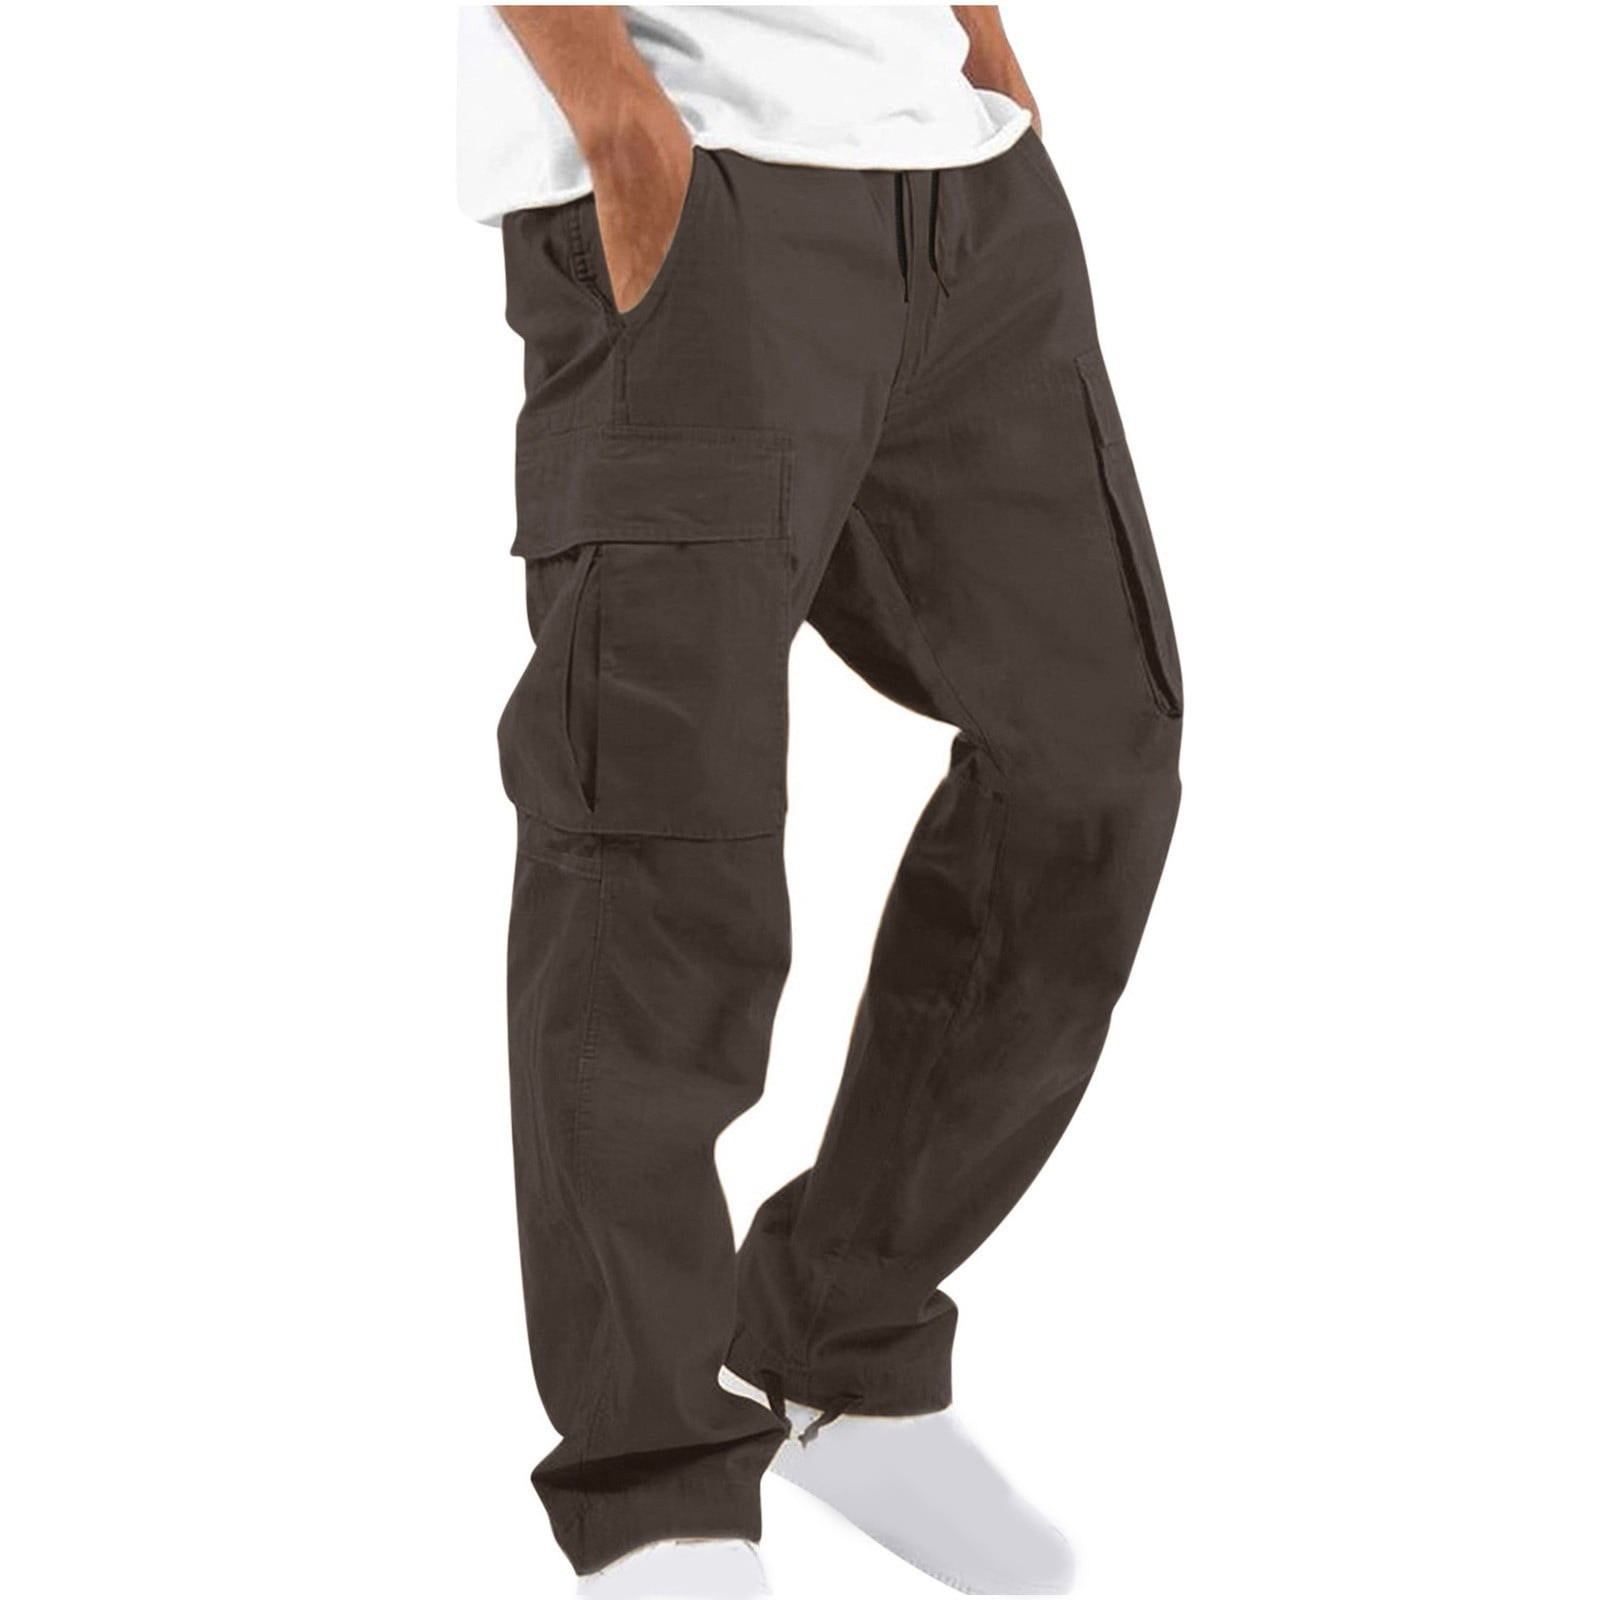 amidoa Men's Solid Color Cargo Pants Drawstring Elastic Waist Pants with Multiple  Pockets Wide Leg Casual Trousers 